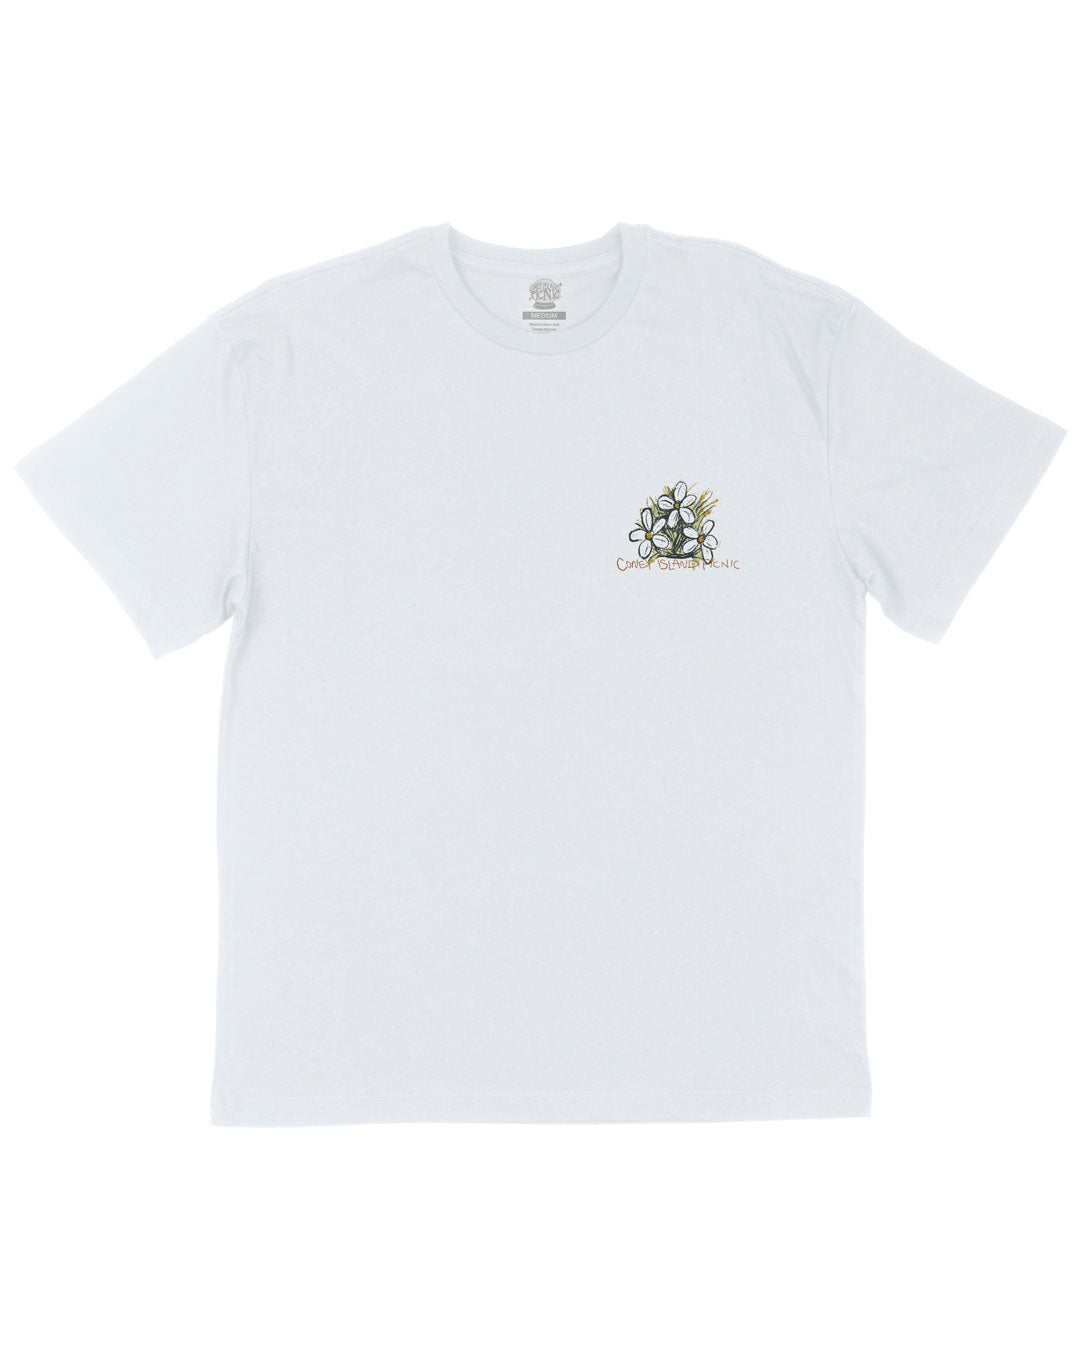 Flowers to the People Graphic Short Sleeve Tee